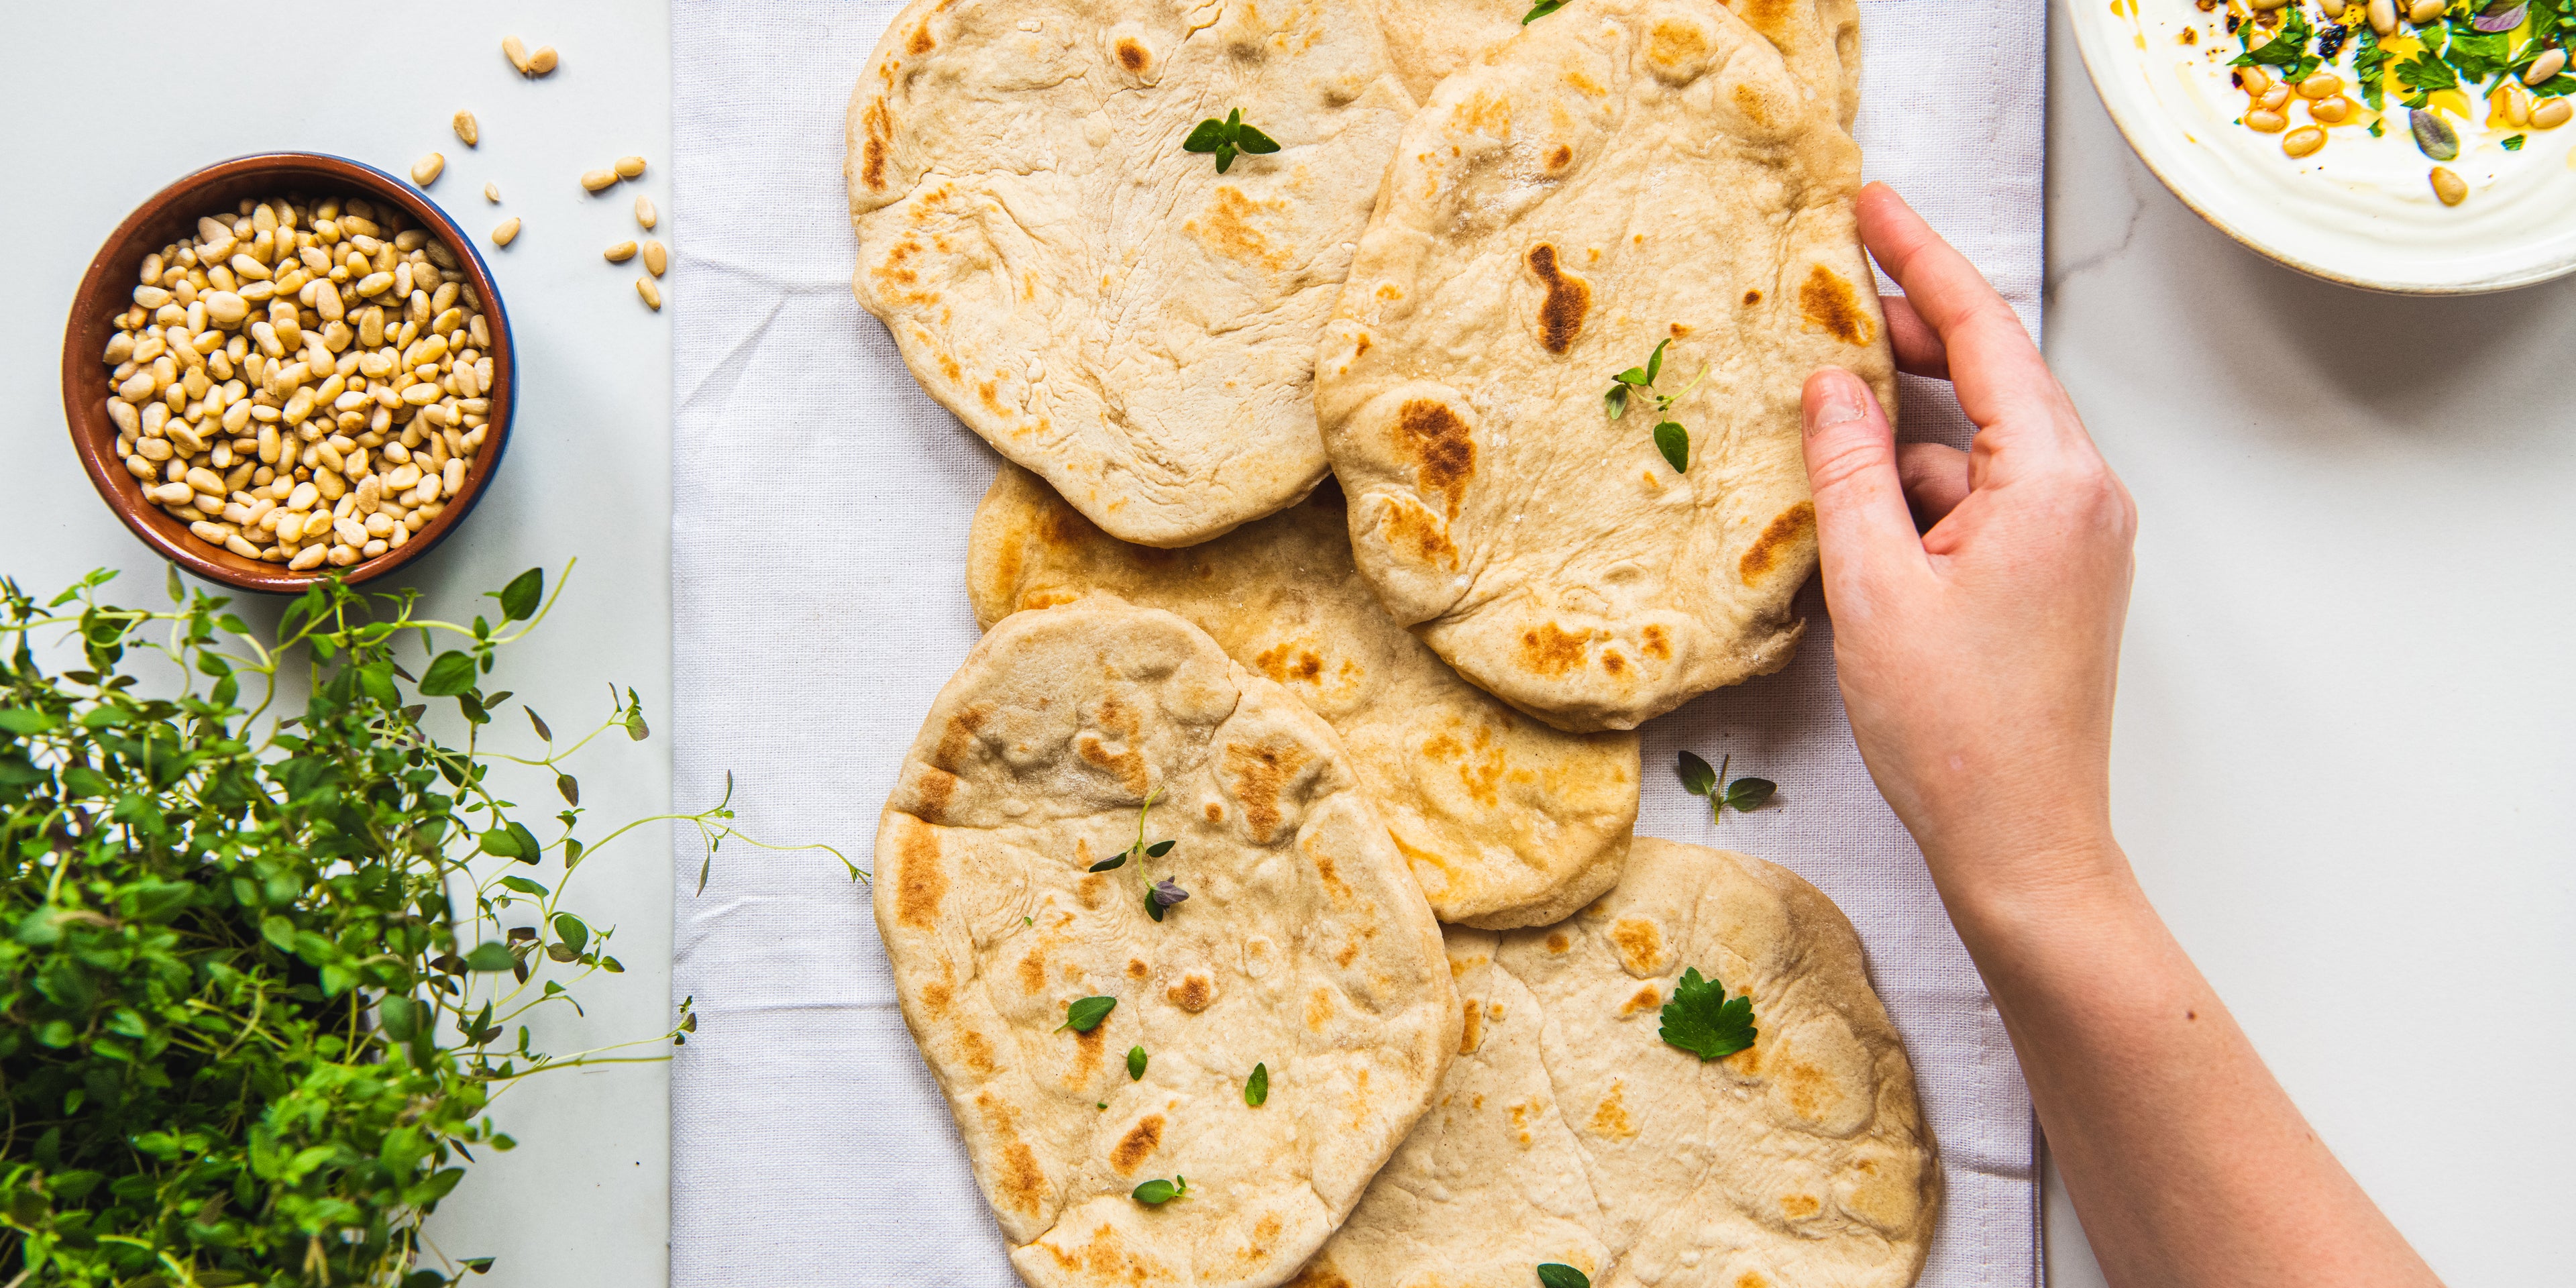 Top down shot of hand reaching in to pick up a kefir flatbread on a plate of kefir flatbreads